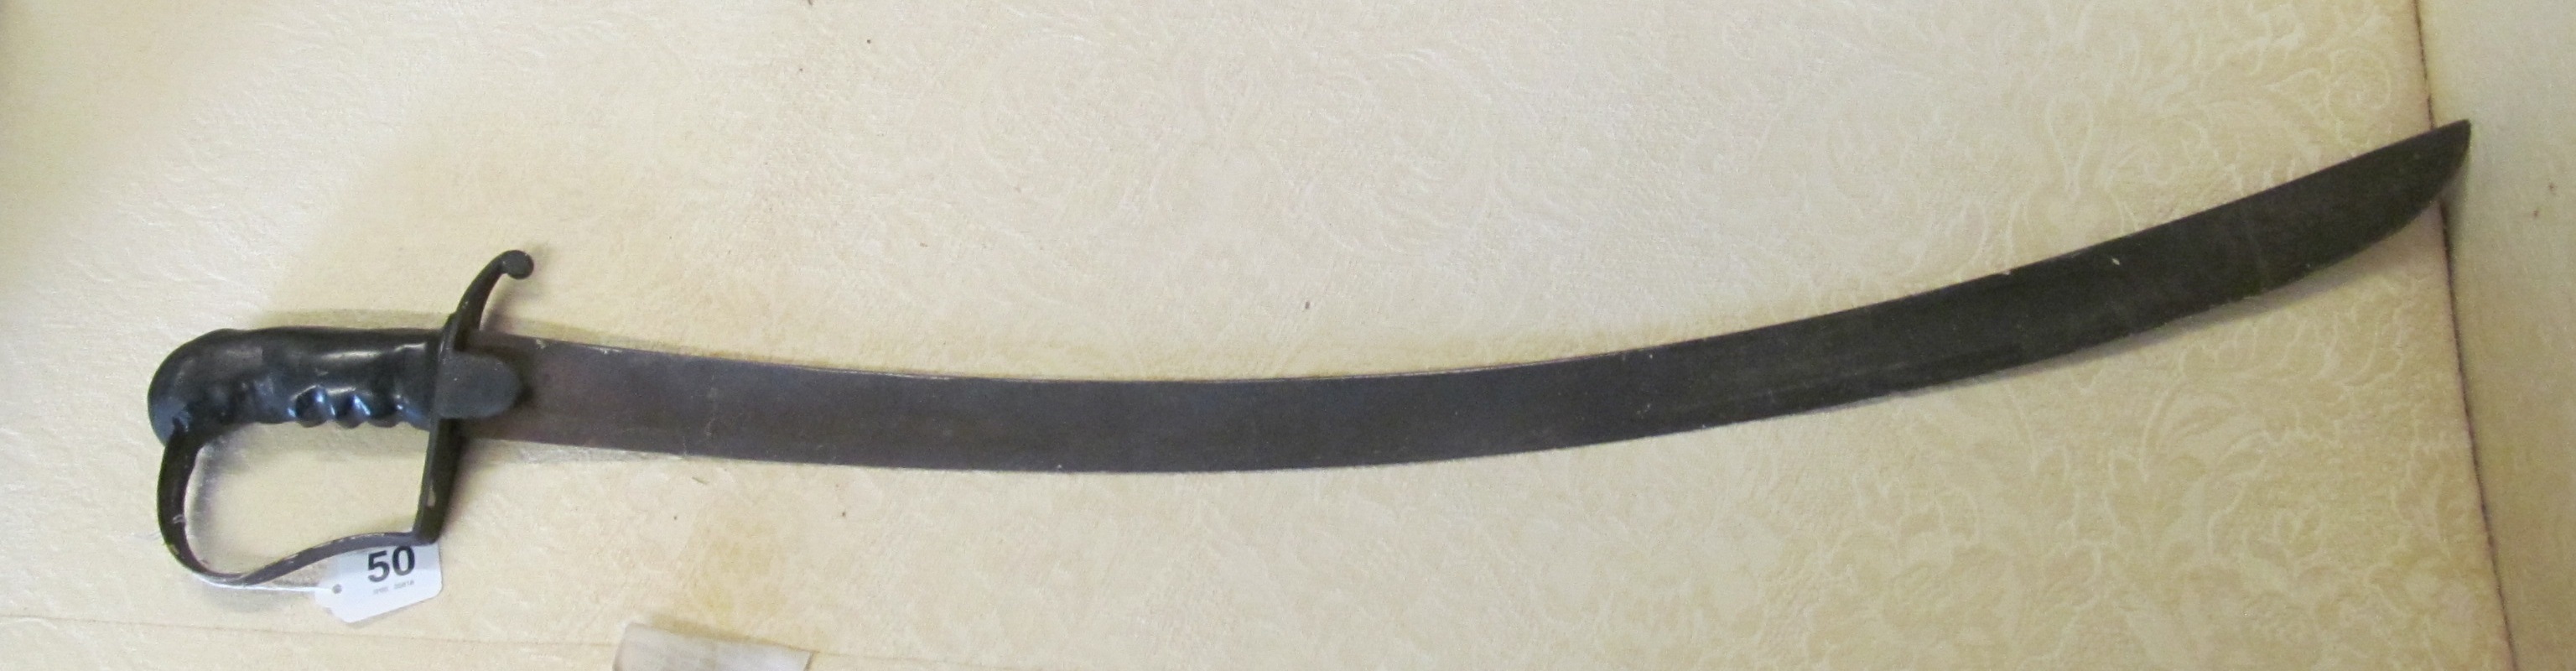 A curved sword - Image 2 of 3